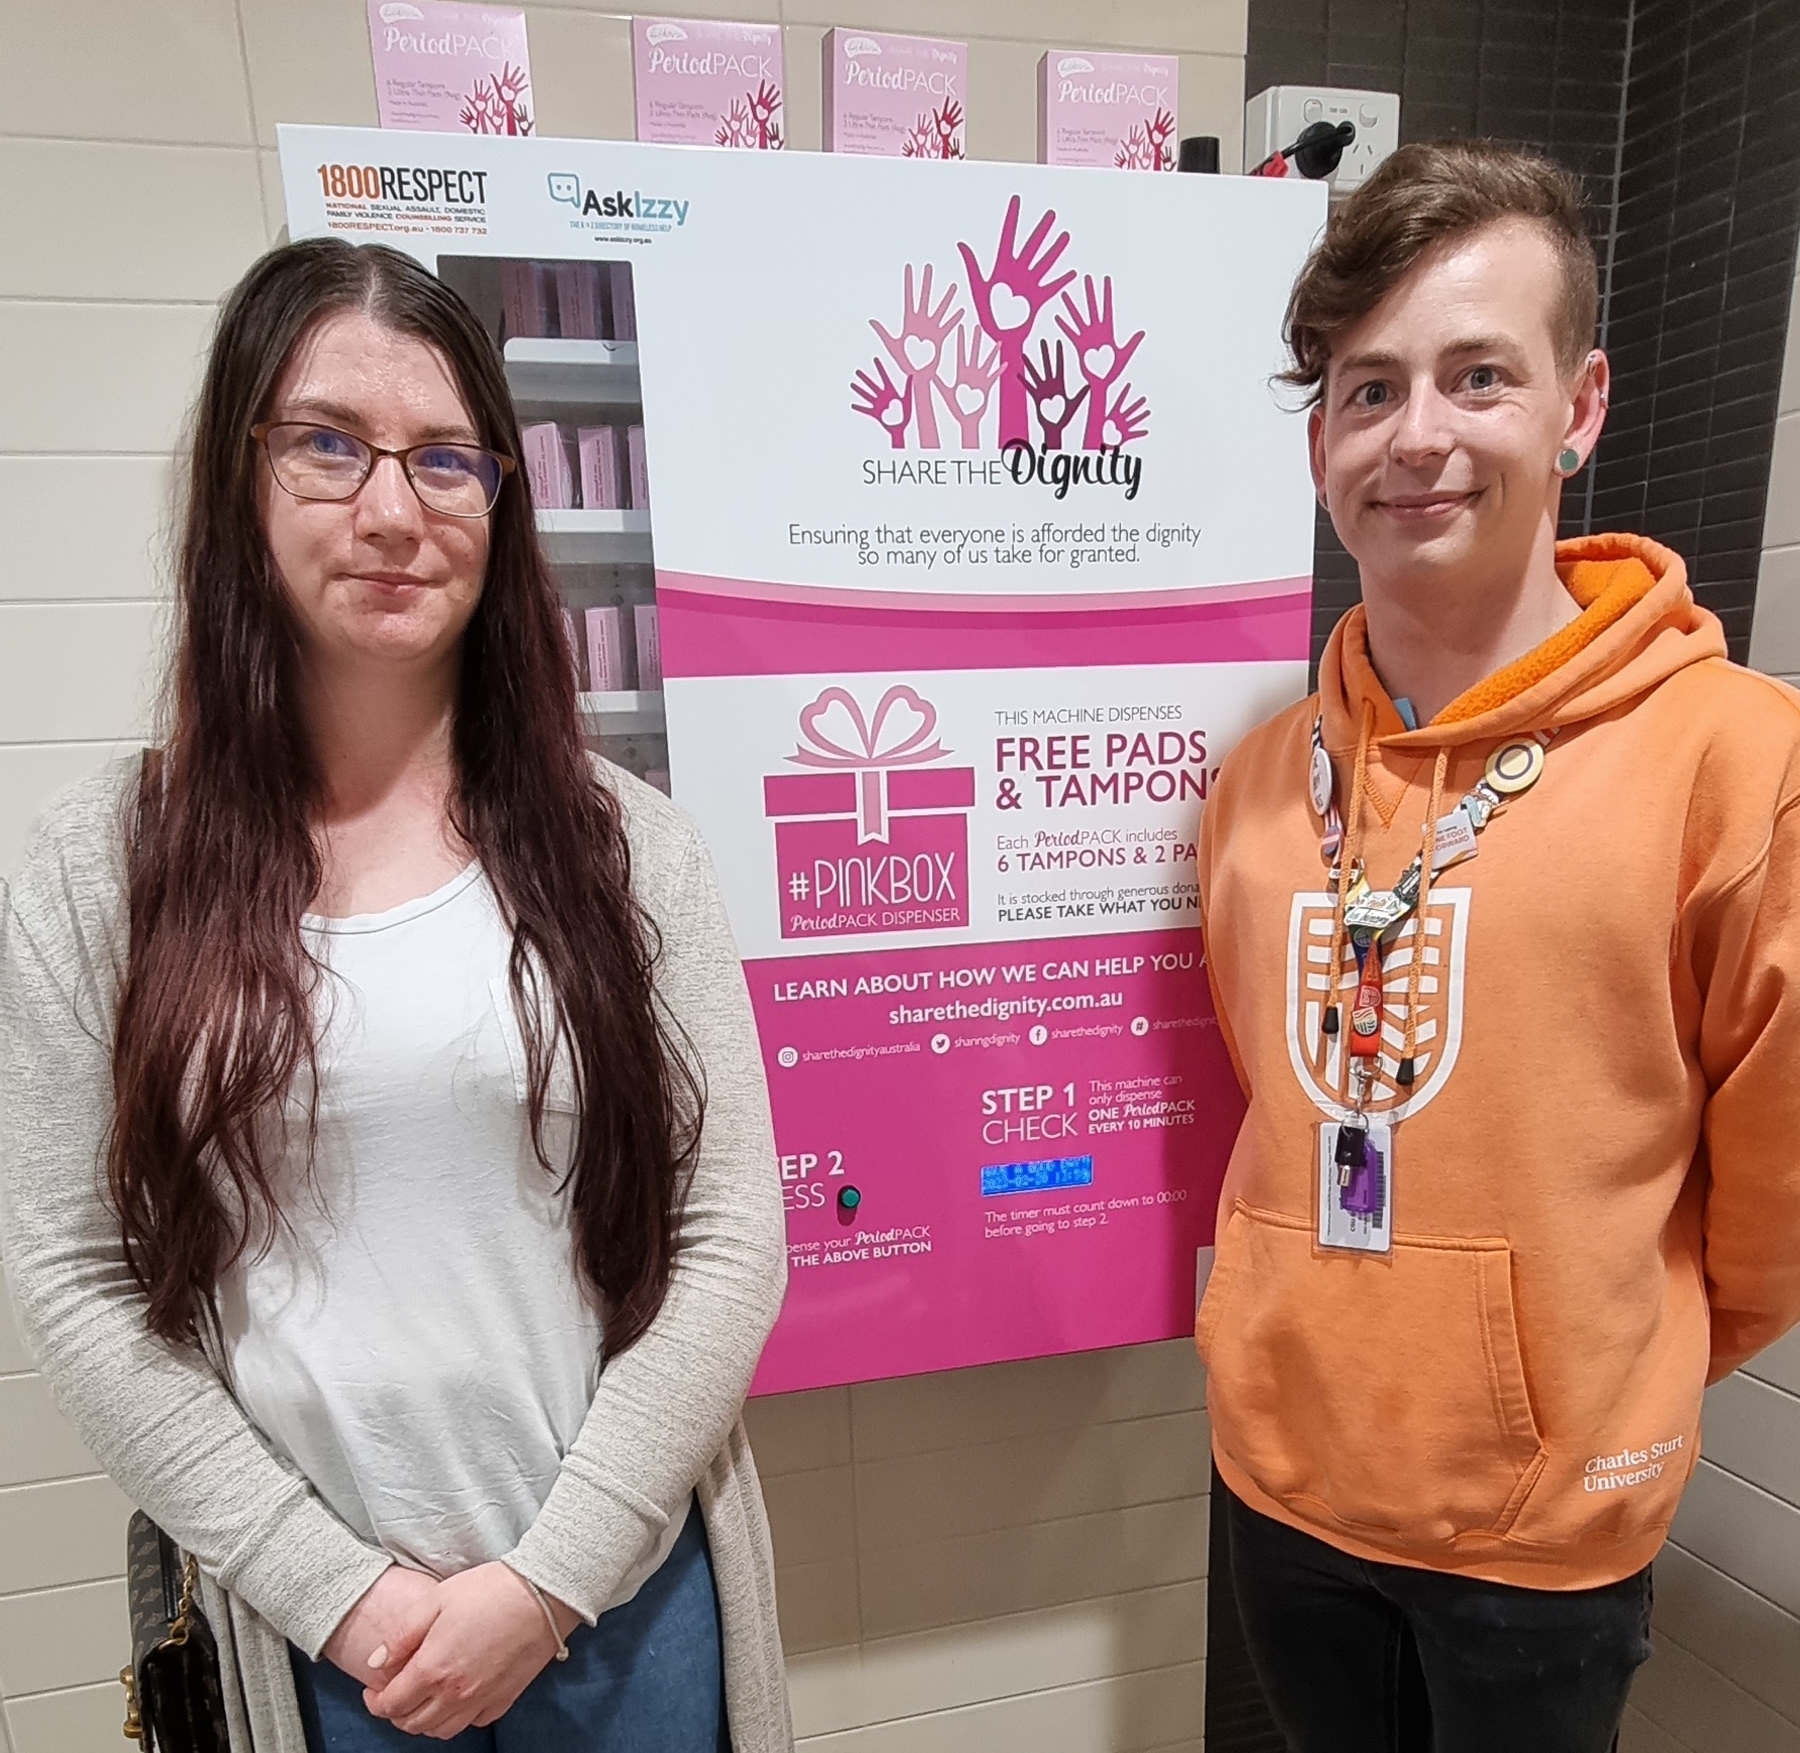 Charles Sturt University staff and students move to end period poverty on campus